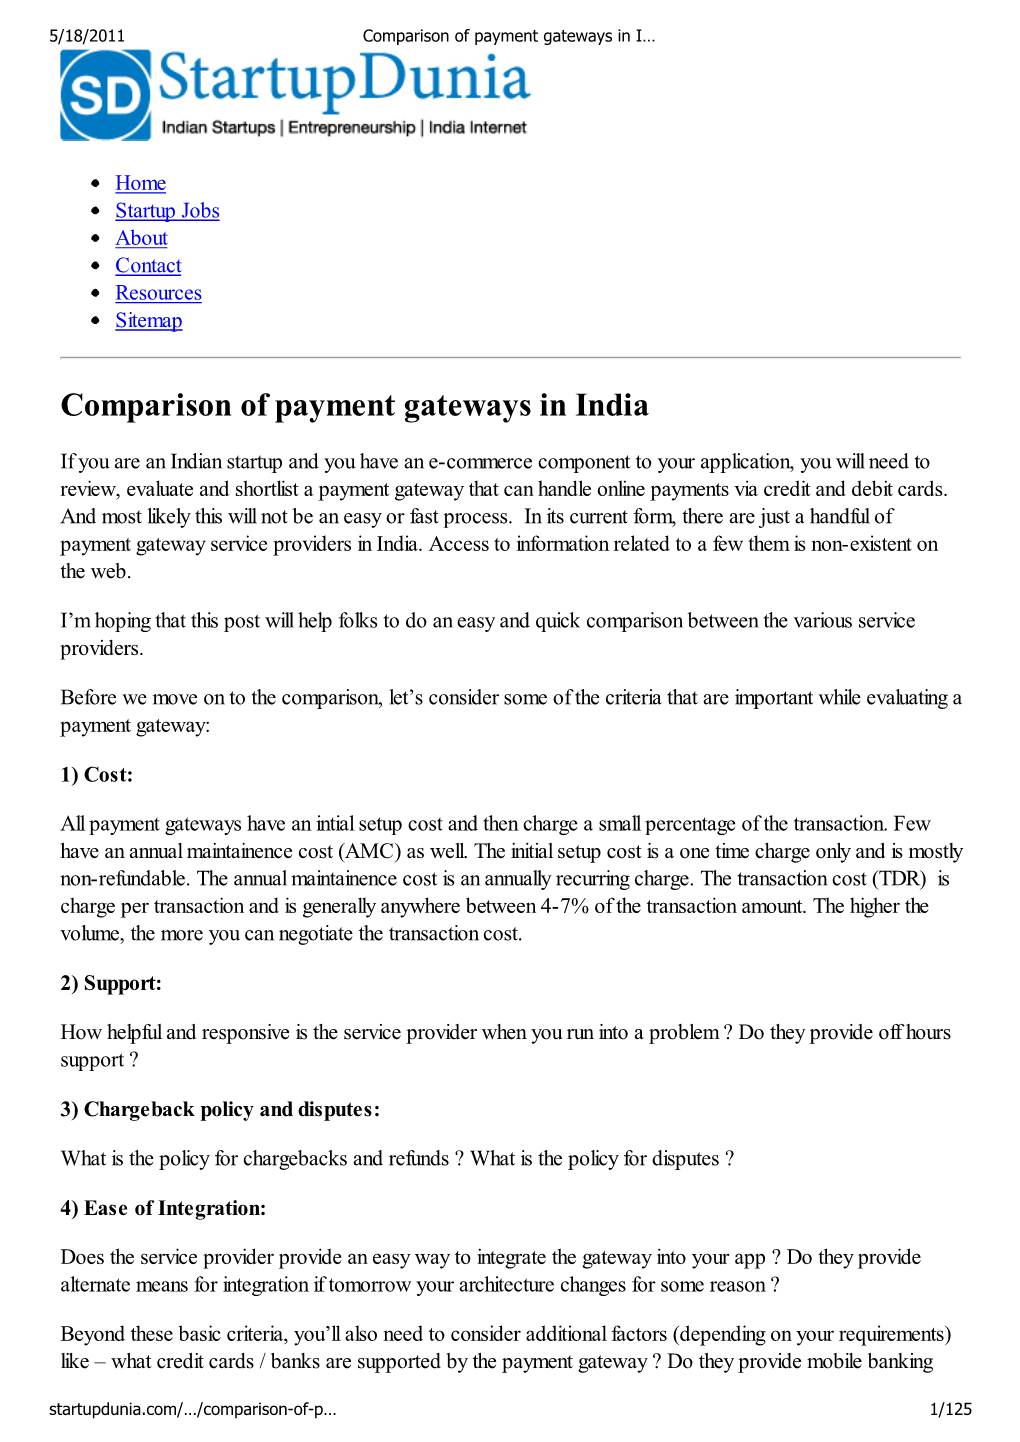 Comparison of Payment Gateways in India | Startupdunia